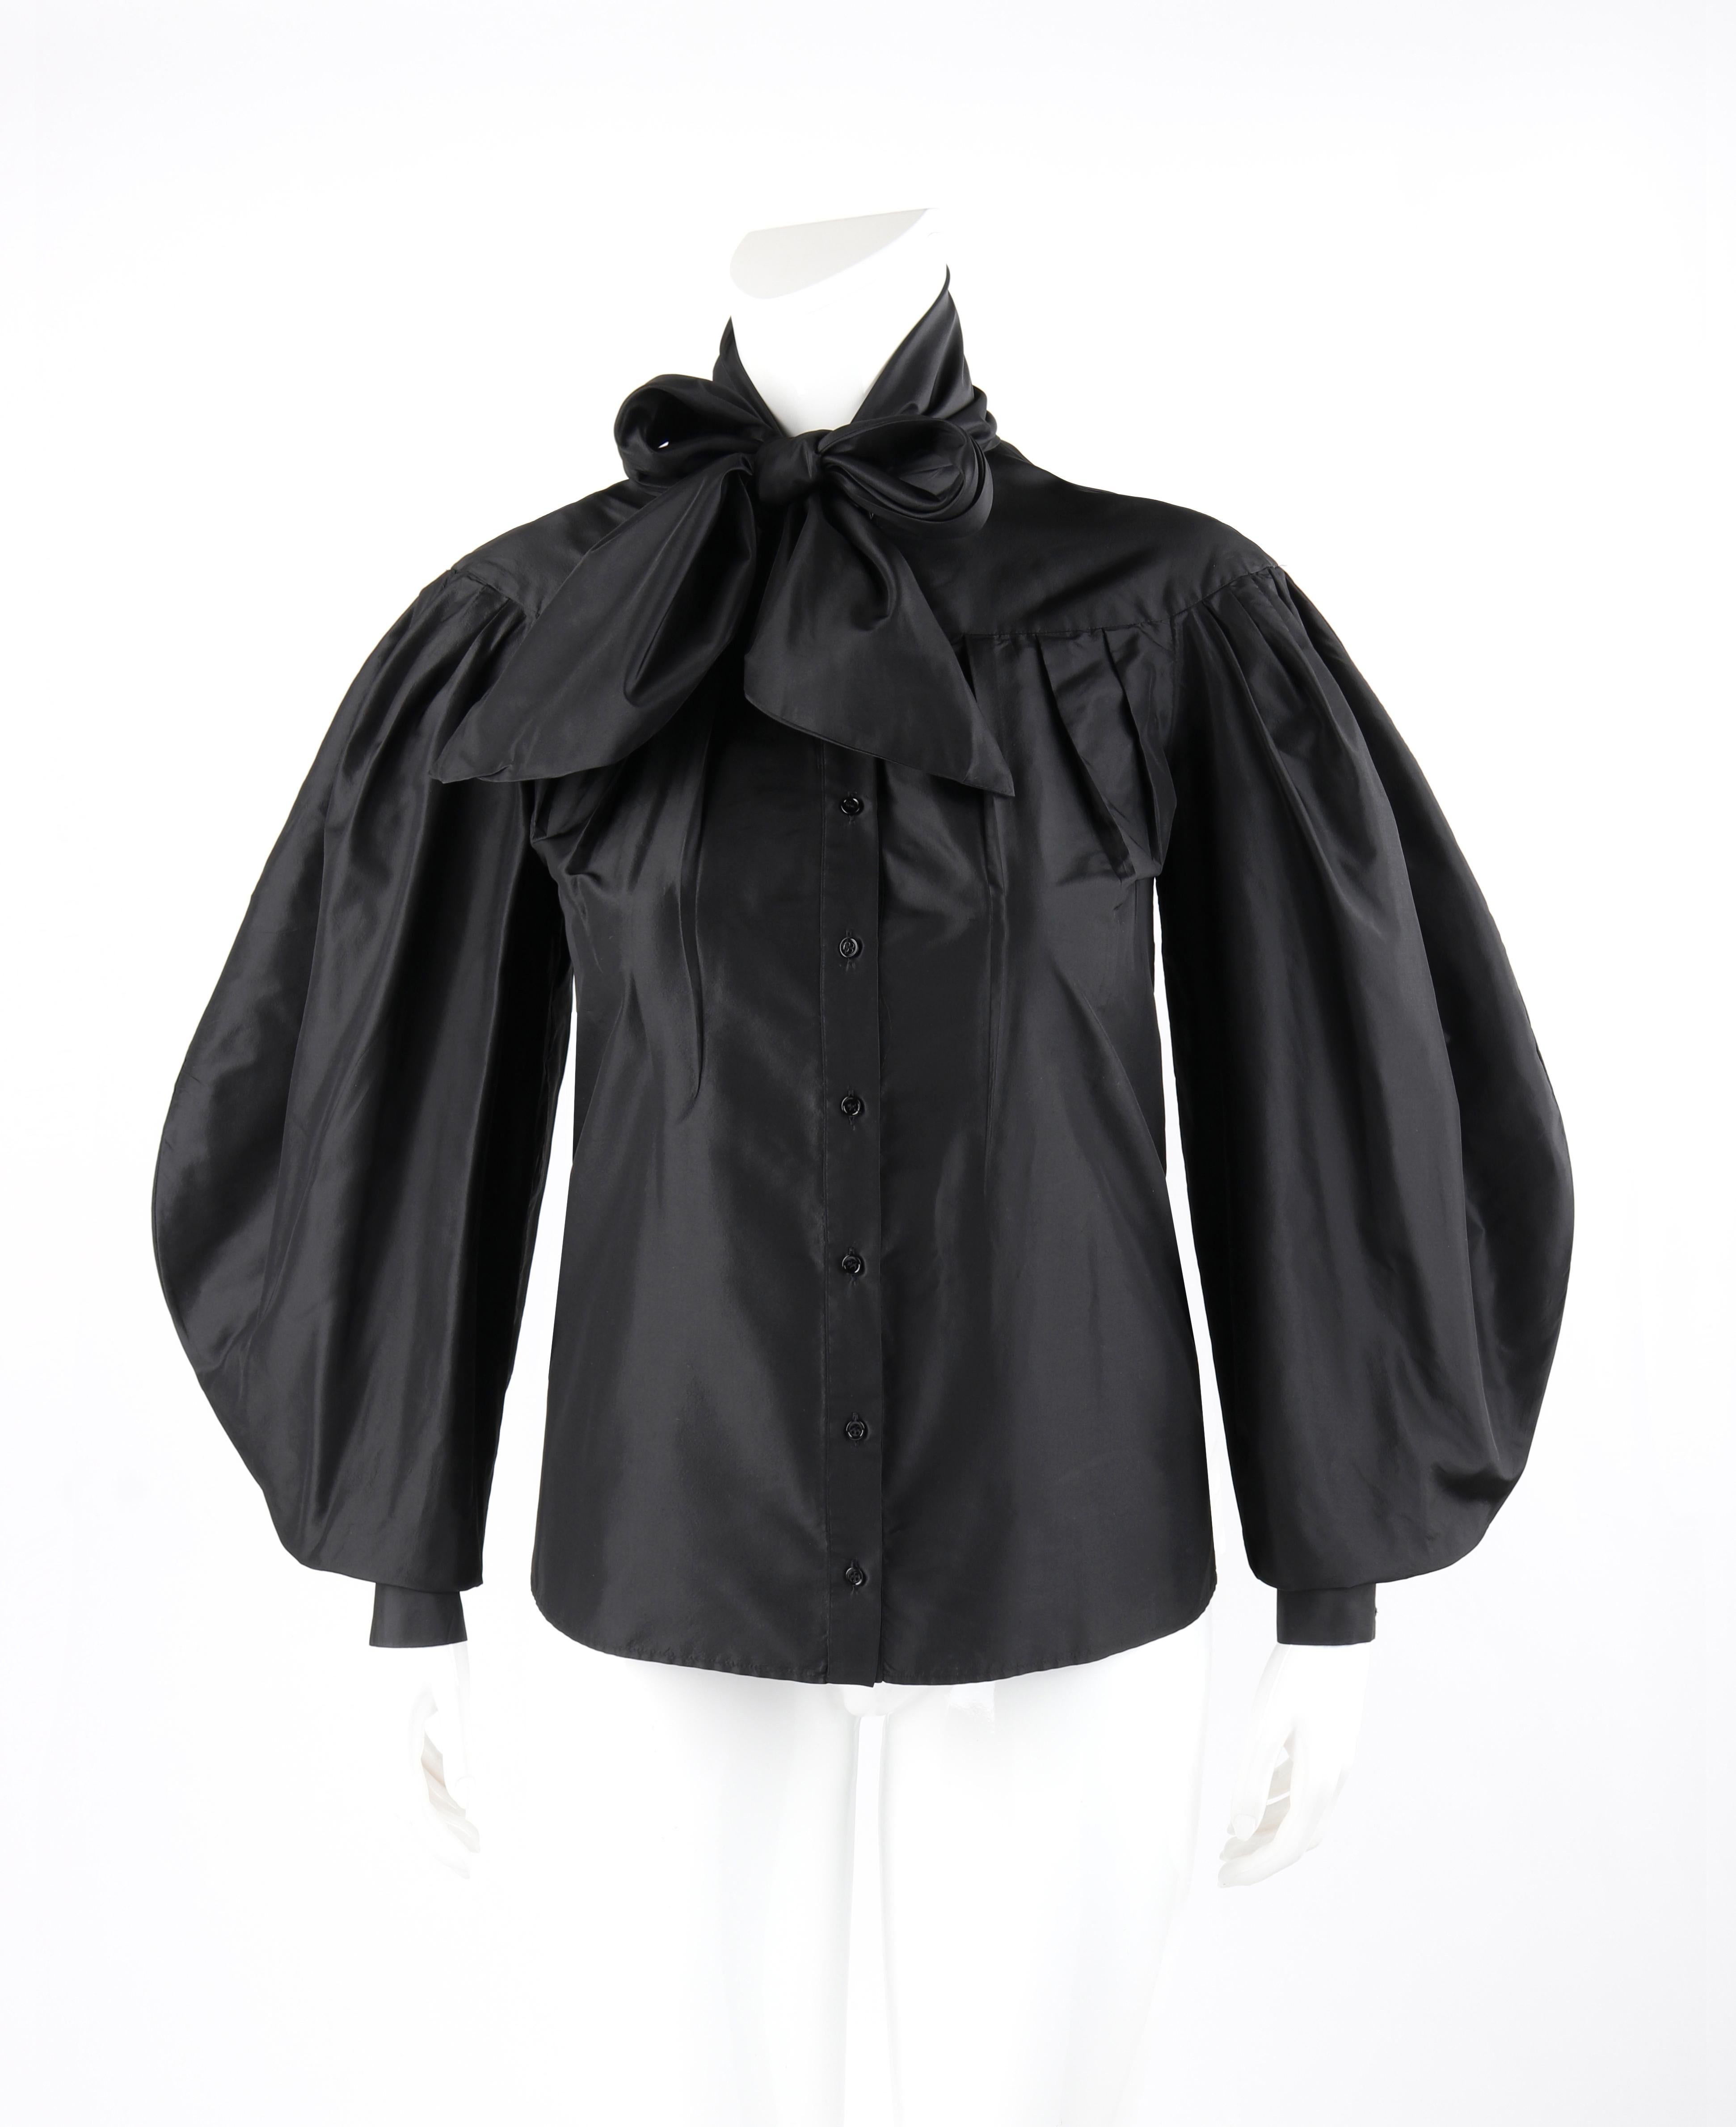 ALEXANDER McQUEEN A/W 2008 Black Silk Pleated Long Bouffant Sleeve Blouse Top

Brand / Manufacturer: Alexander McQueen
Collection: A/W 2008 “The Girl Who Lived In The Tree”- Runway look #10 
Designer: Alexander McQueen
Style: Blouse top; bouffant